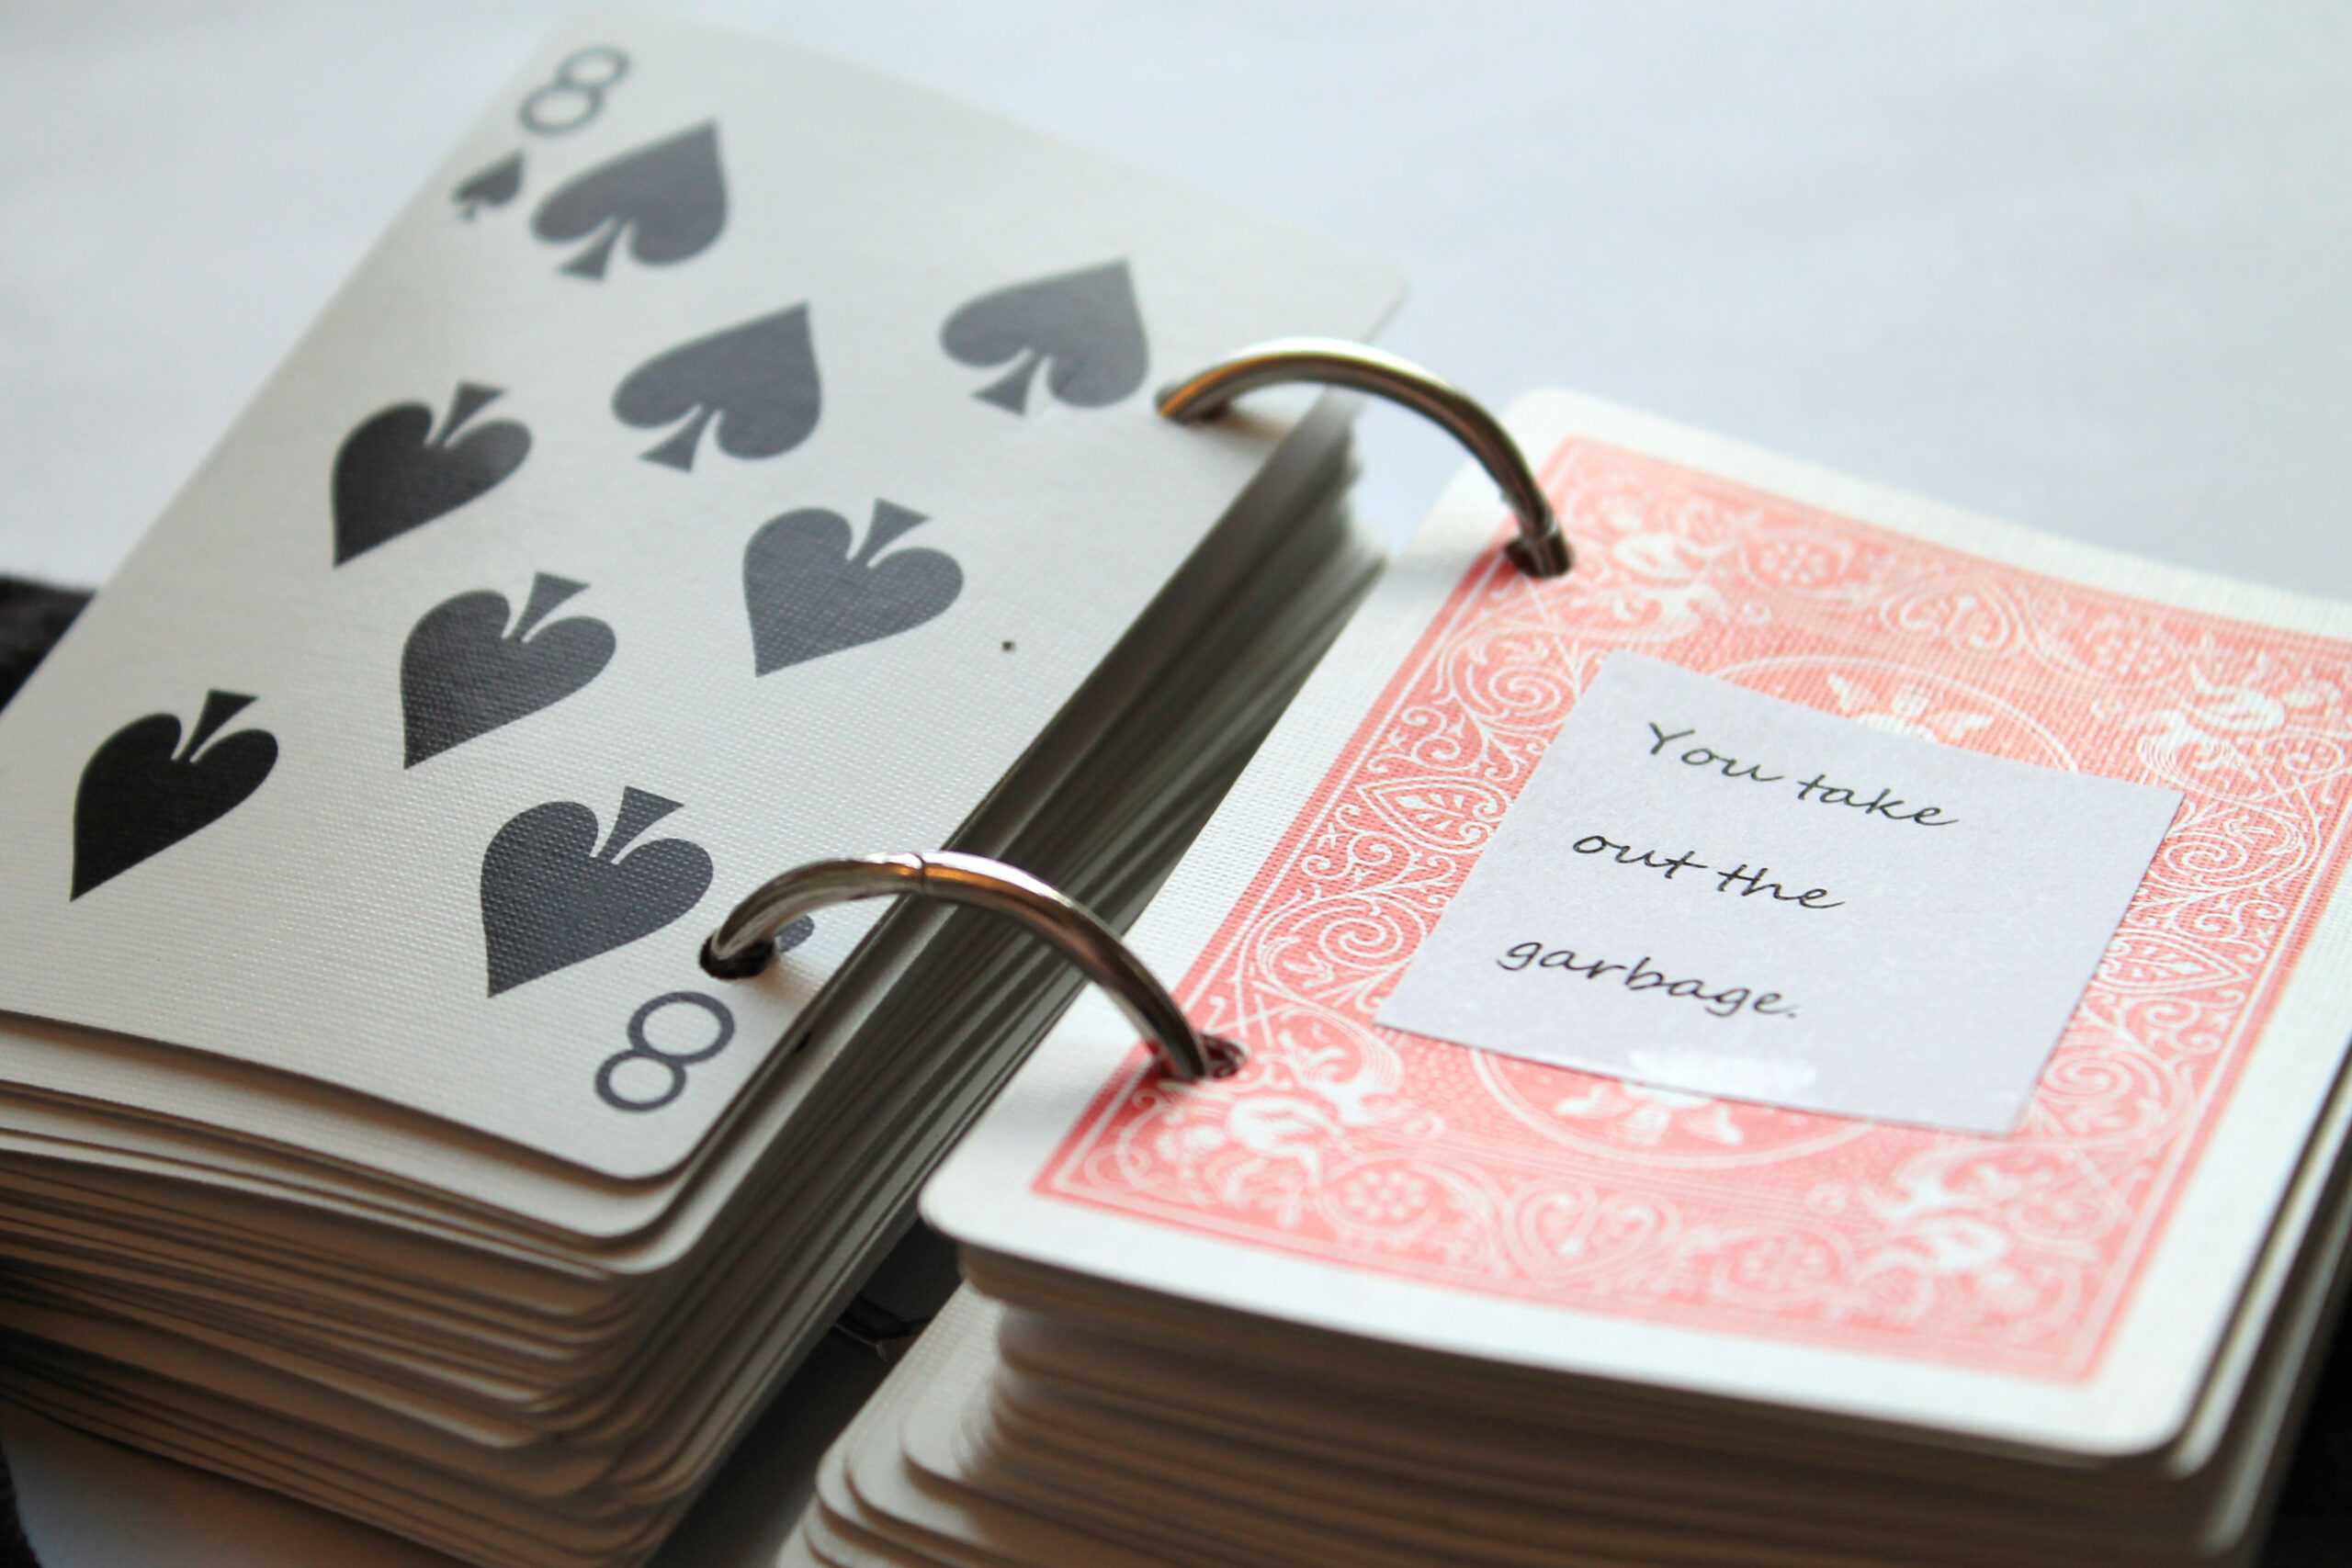 52 Reasons I Love You – Playing Card Book Tutorial With Regard To 52 Reasons Why I Love You Cards Templates